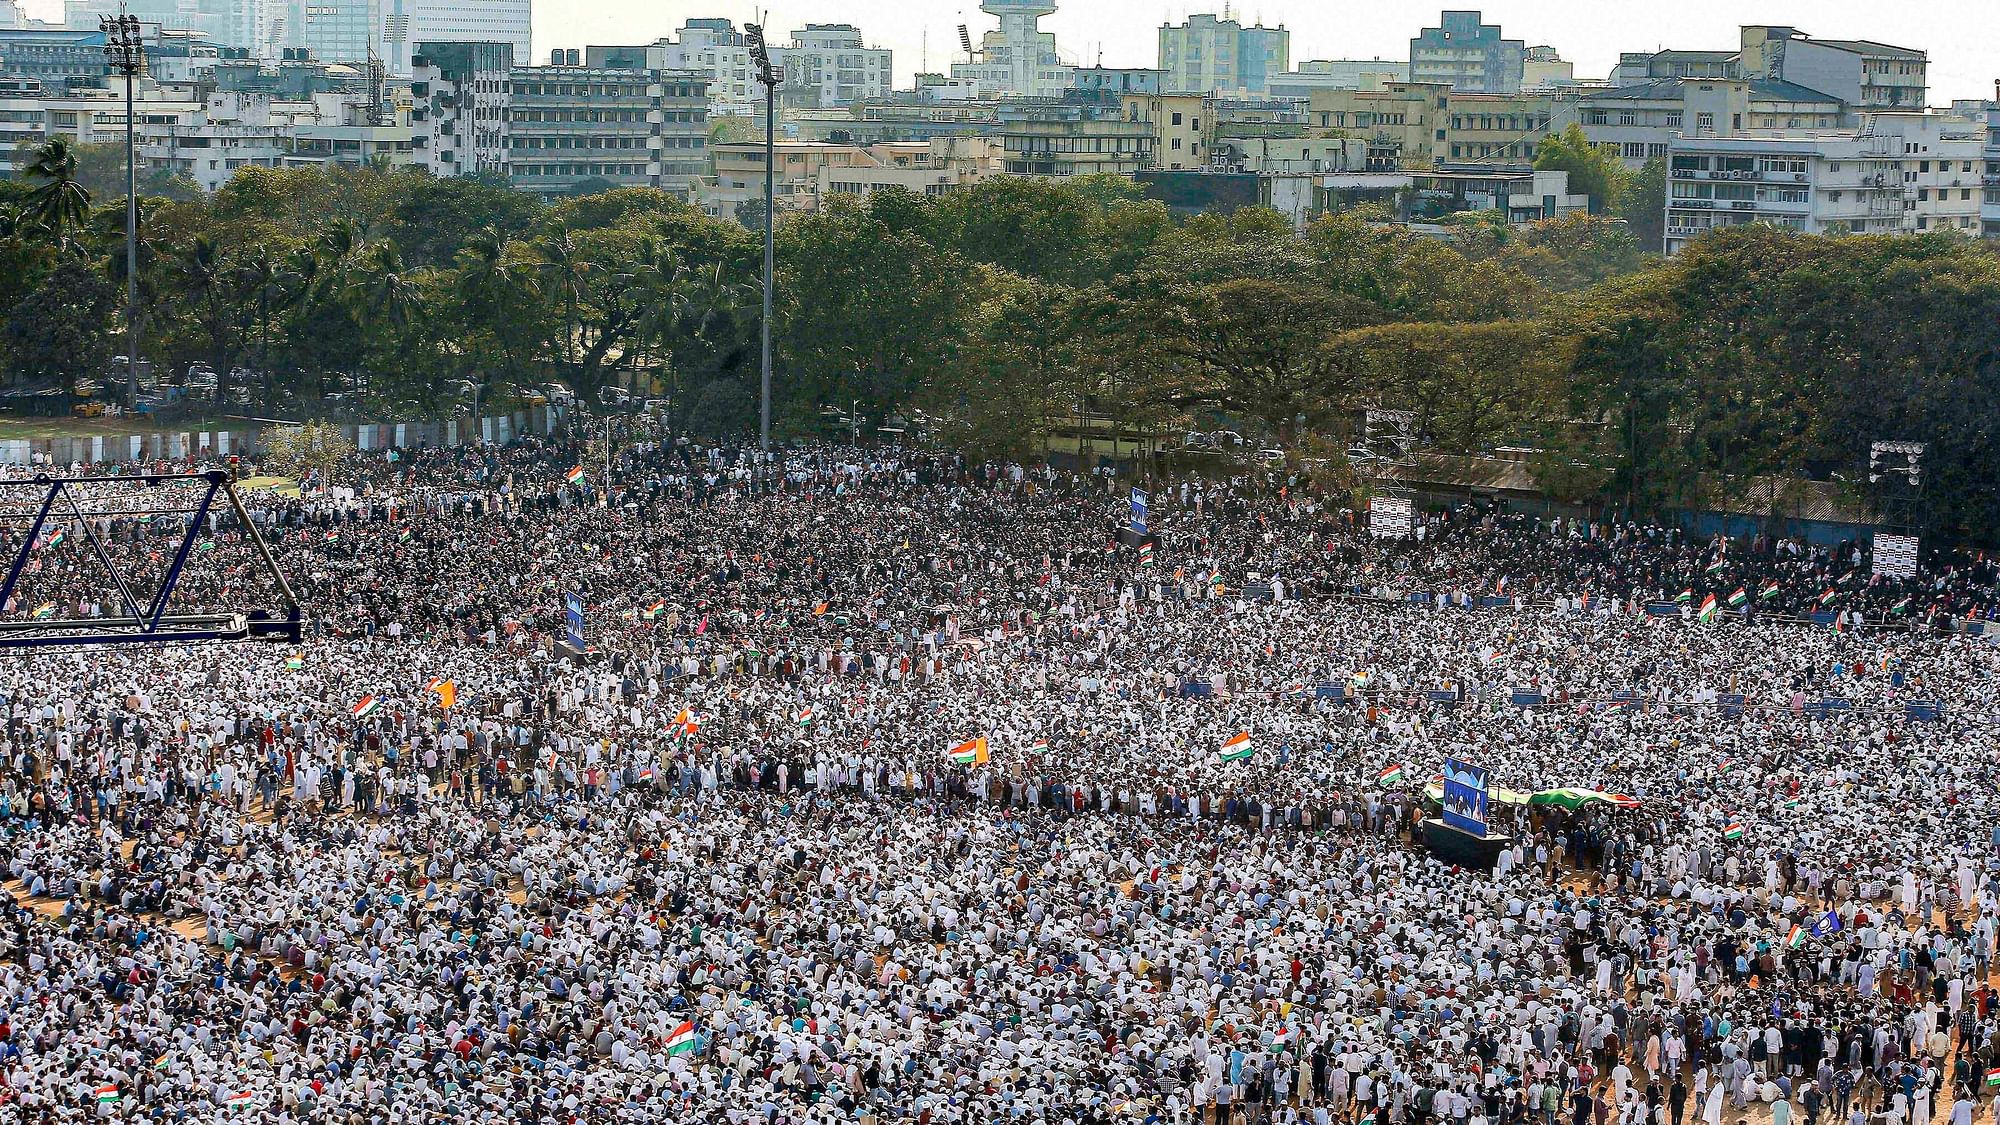 Tens of thousands of protesters gathered at Mumbai’s Azad Maidan on 15 February, to register their disapproval against CAA-NRC-NPR.